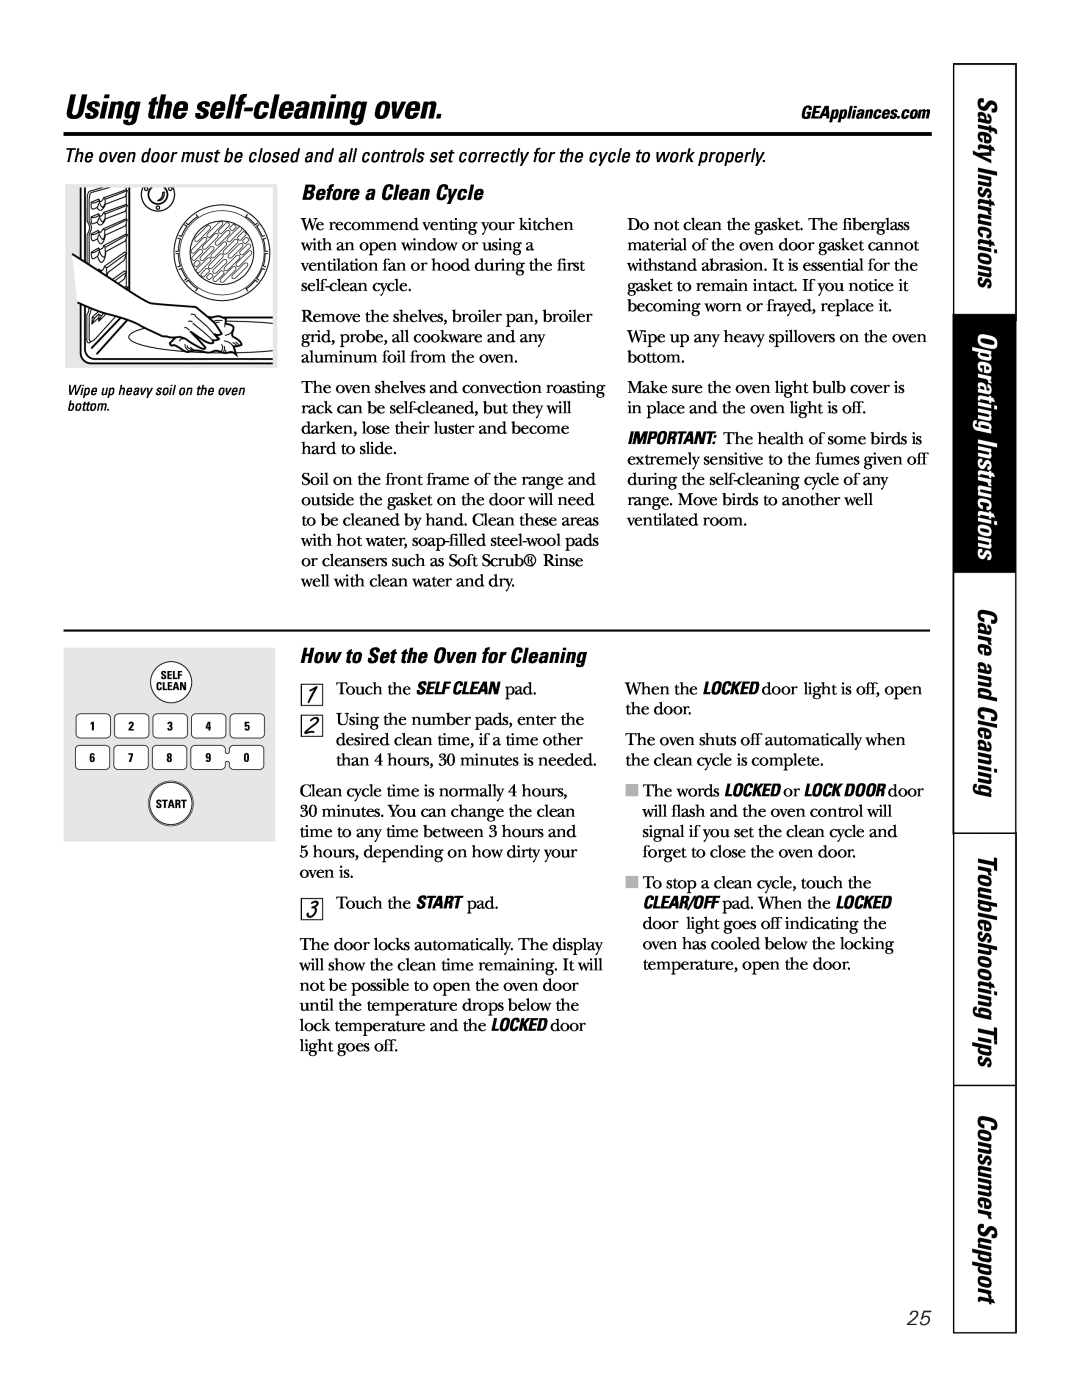 GE JB965 owner manual Using the self-cleaning oven, Instructions Operating Instructions Care, Before a Clean Cycle, Safety 